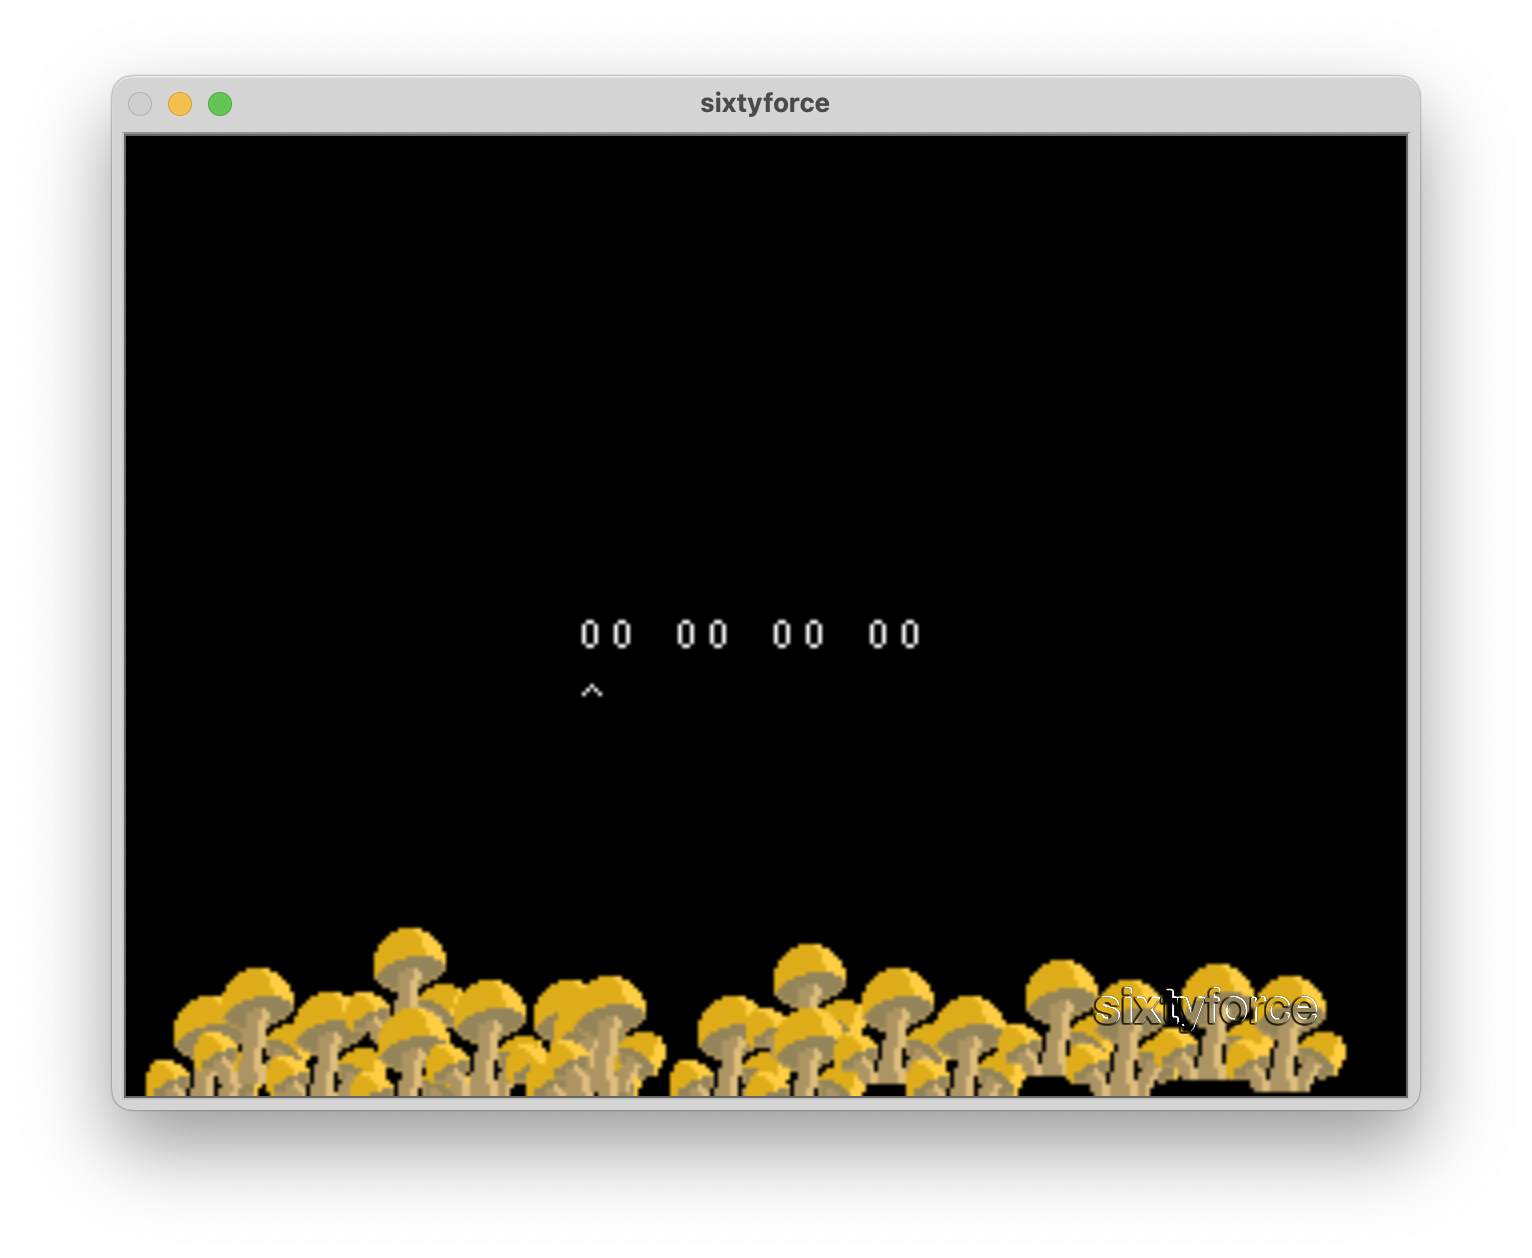 A picture of the SixtyForce emulator running the ROM. There are yellow mushrooms lining the bottom of the screen, and the text "00 00 00 00" is centred.